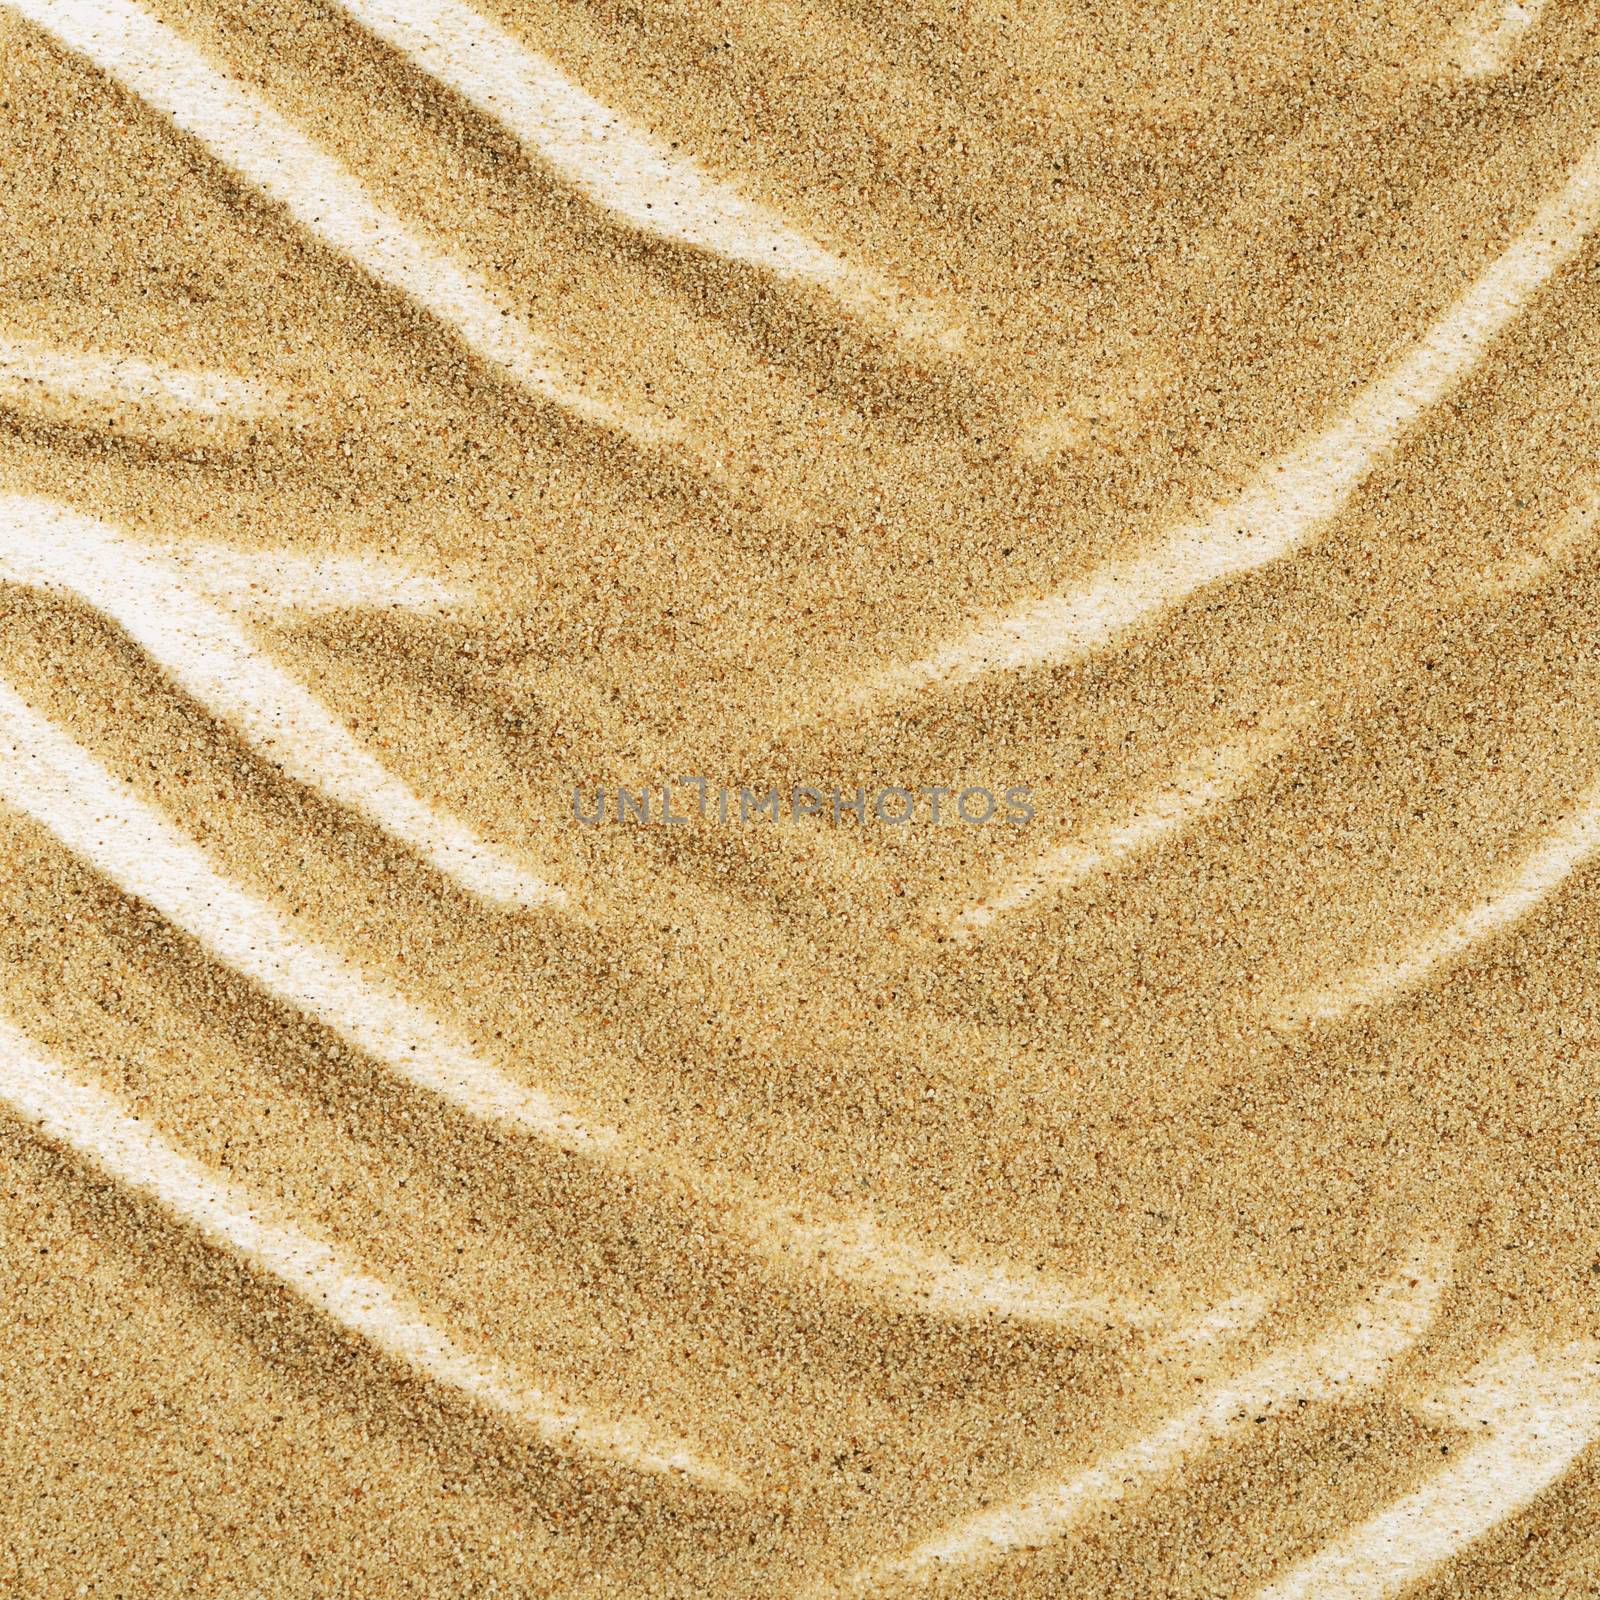 Sand texture as a background. Close up